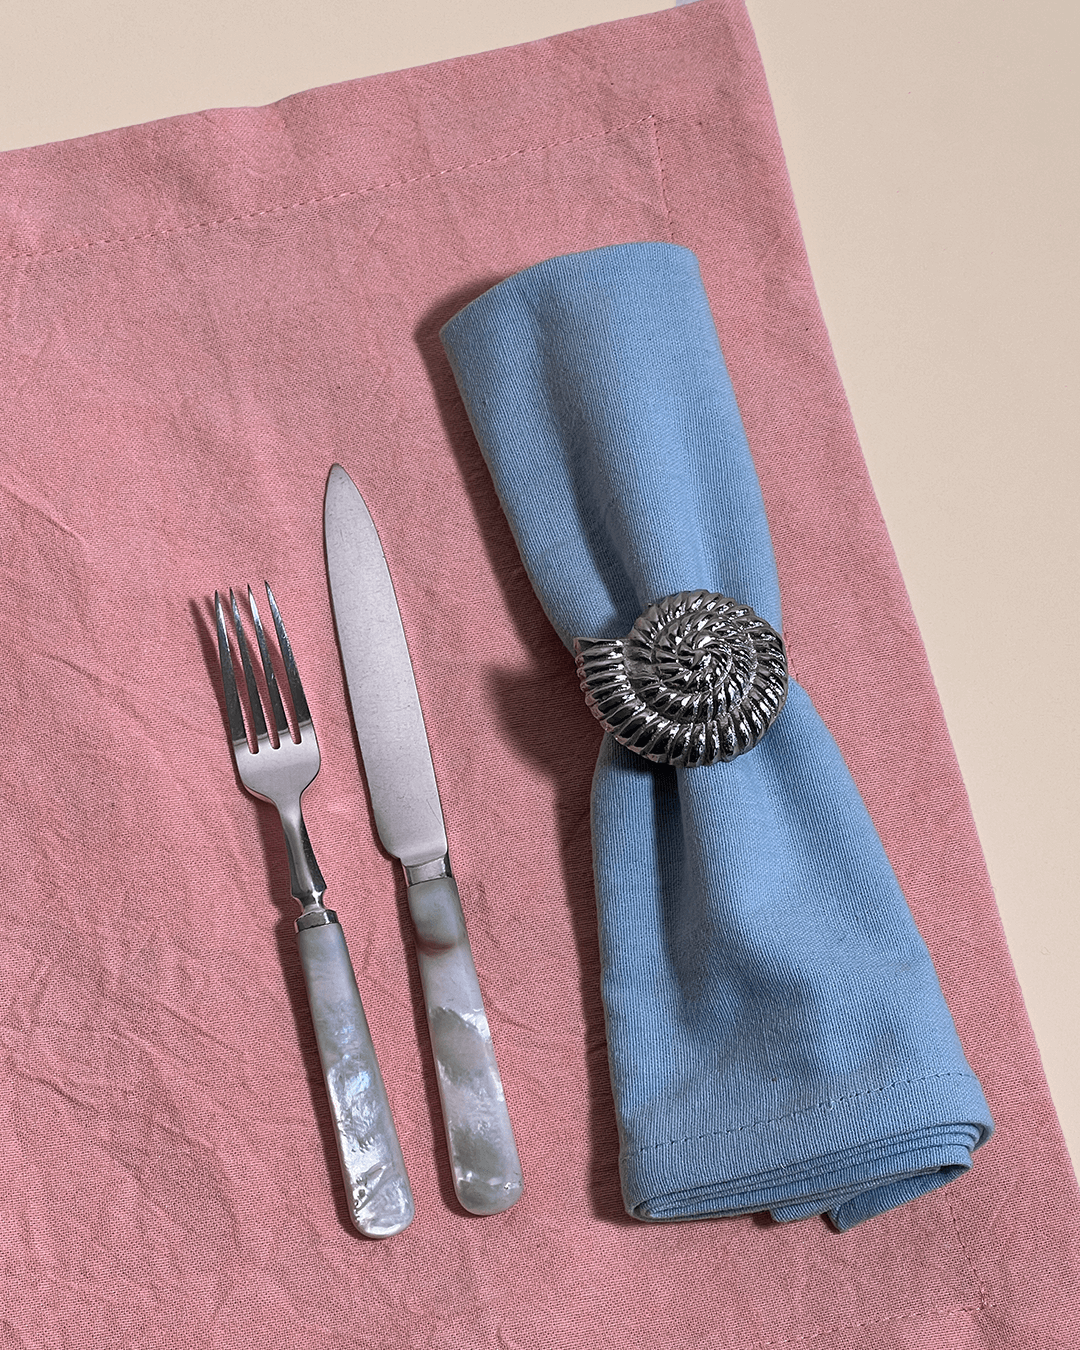 This cotton napkin comes in a set of 4, helps keep hands clean at all times. The whole tableware collection by Arles Studio is inspired by the idea of setting a fine table and sharing a meal with friends and family. The products are dyed by hand, keeping its natural texture and feel. The fabrics are made from 100% cotton and the soft and creamy pastel colors are spot on.  Our tip: mix and match with the Arles Studio placemats and tablecloths.